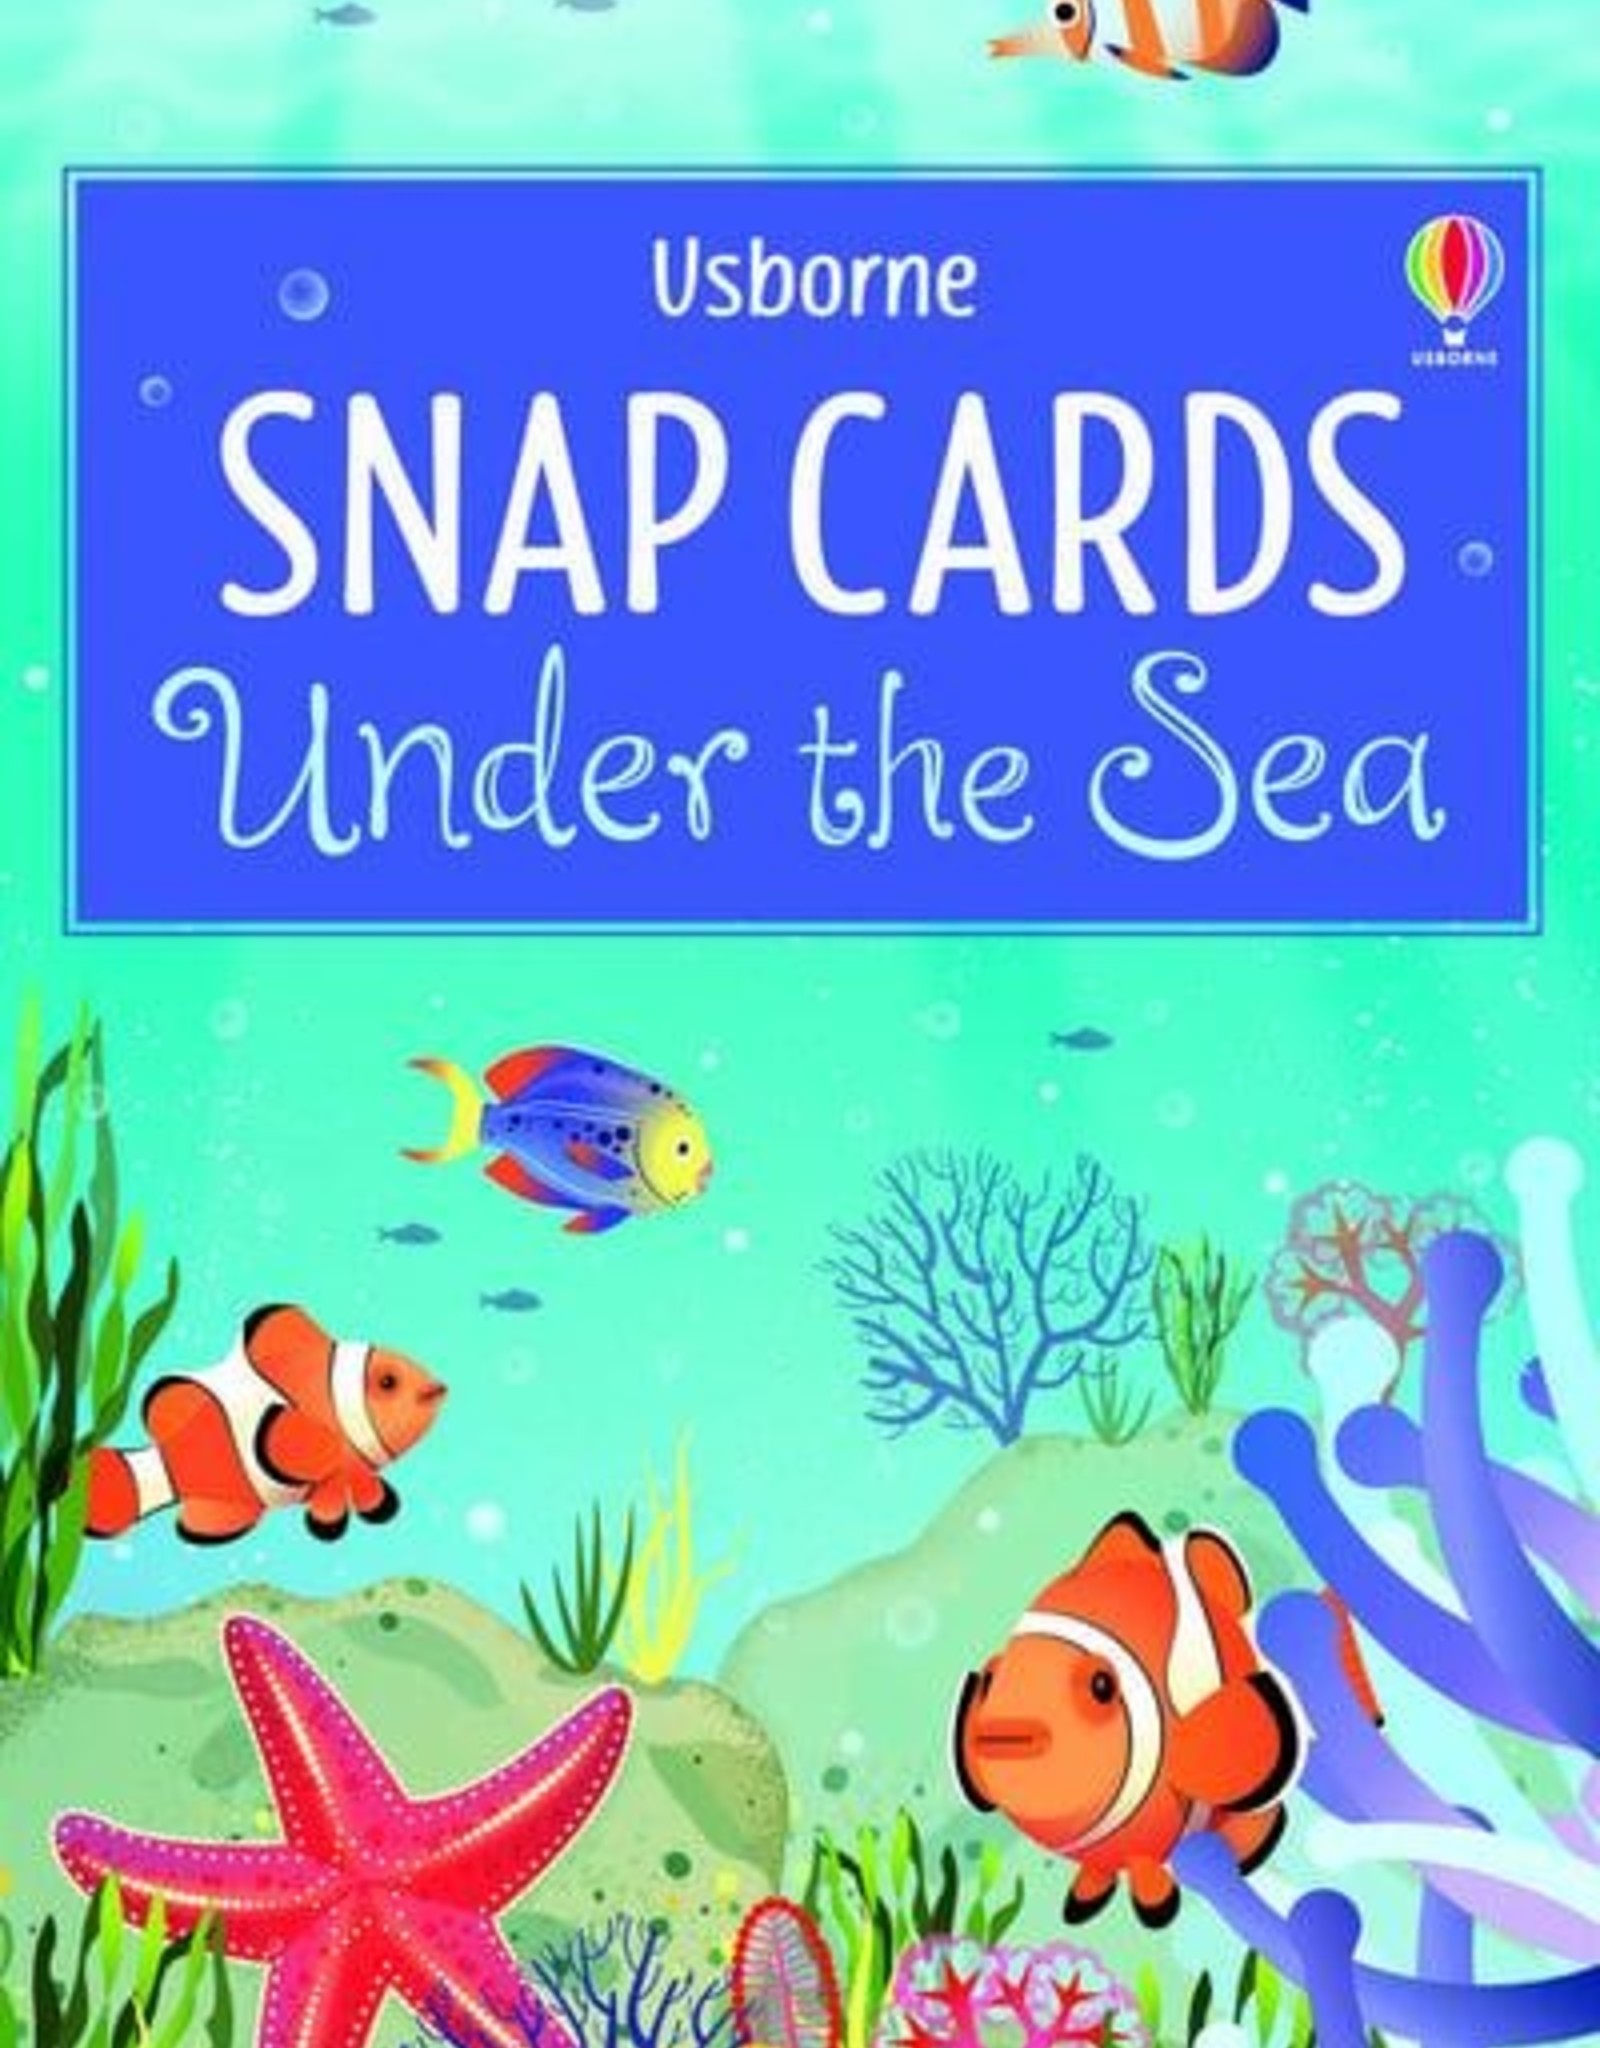 UNDER THE SEA SNAP CARDS